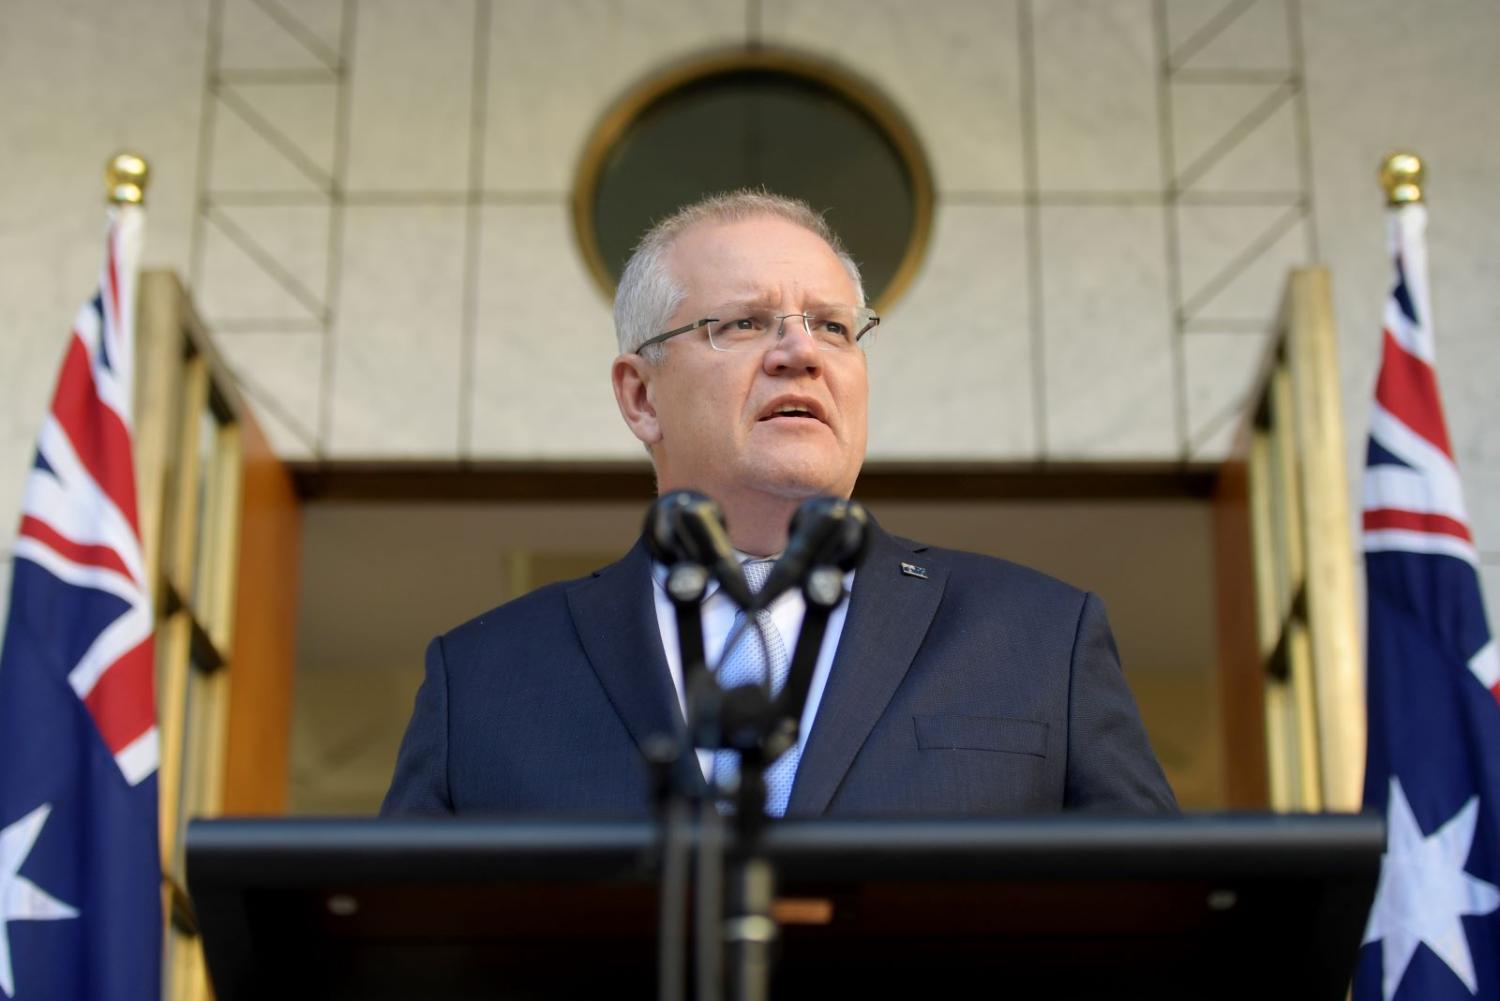 Big on trade... Prime Minister Morrison speaking after his election in May. (Photo: Tracey Nearmy/Getty)